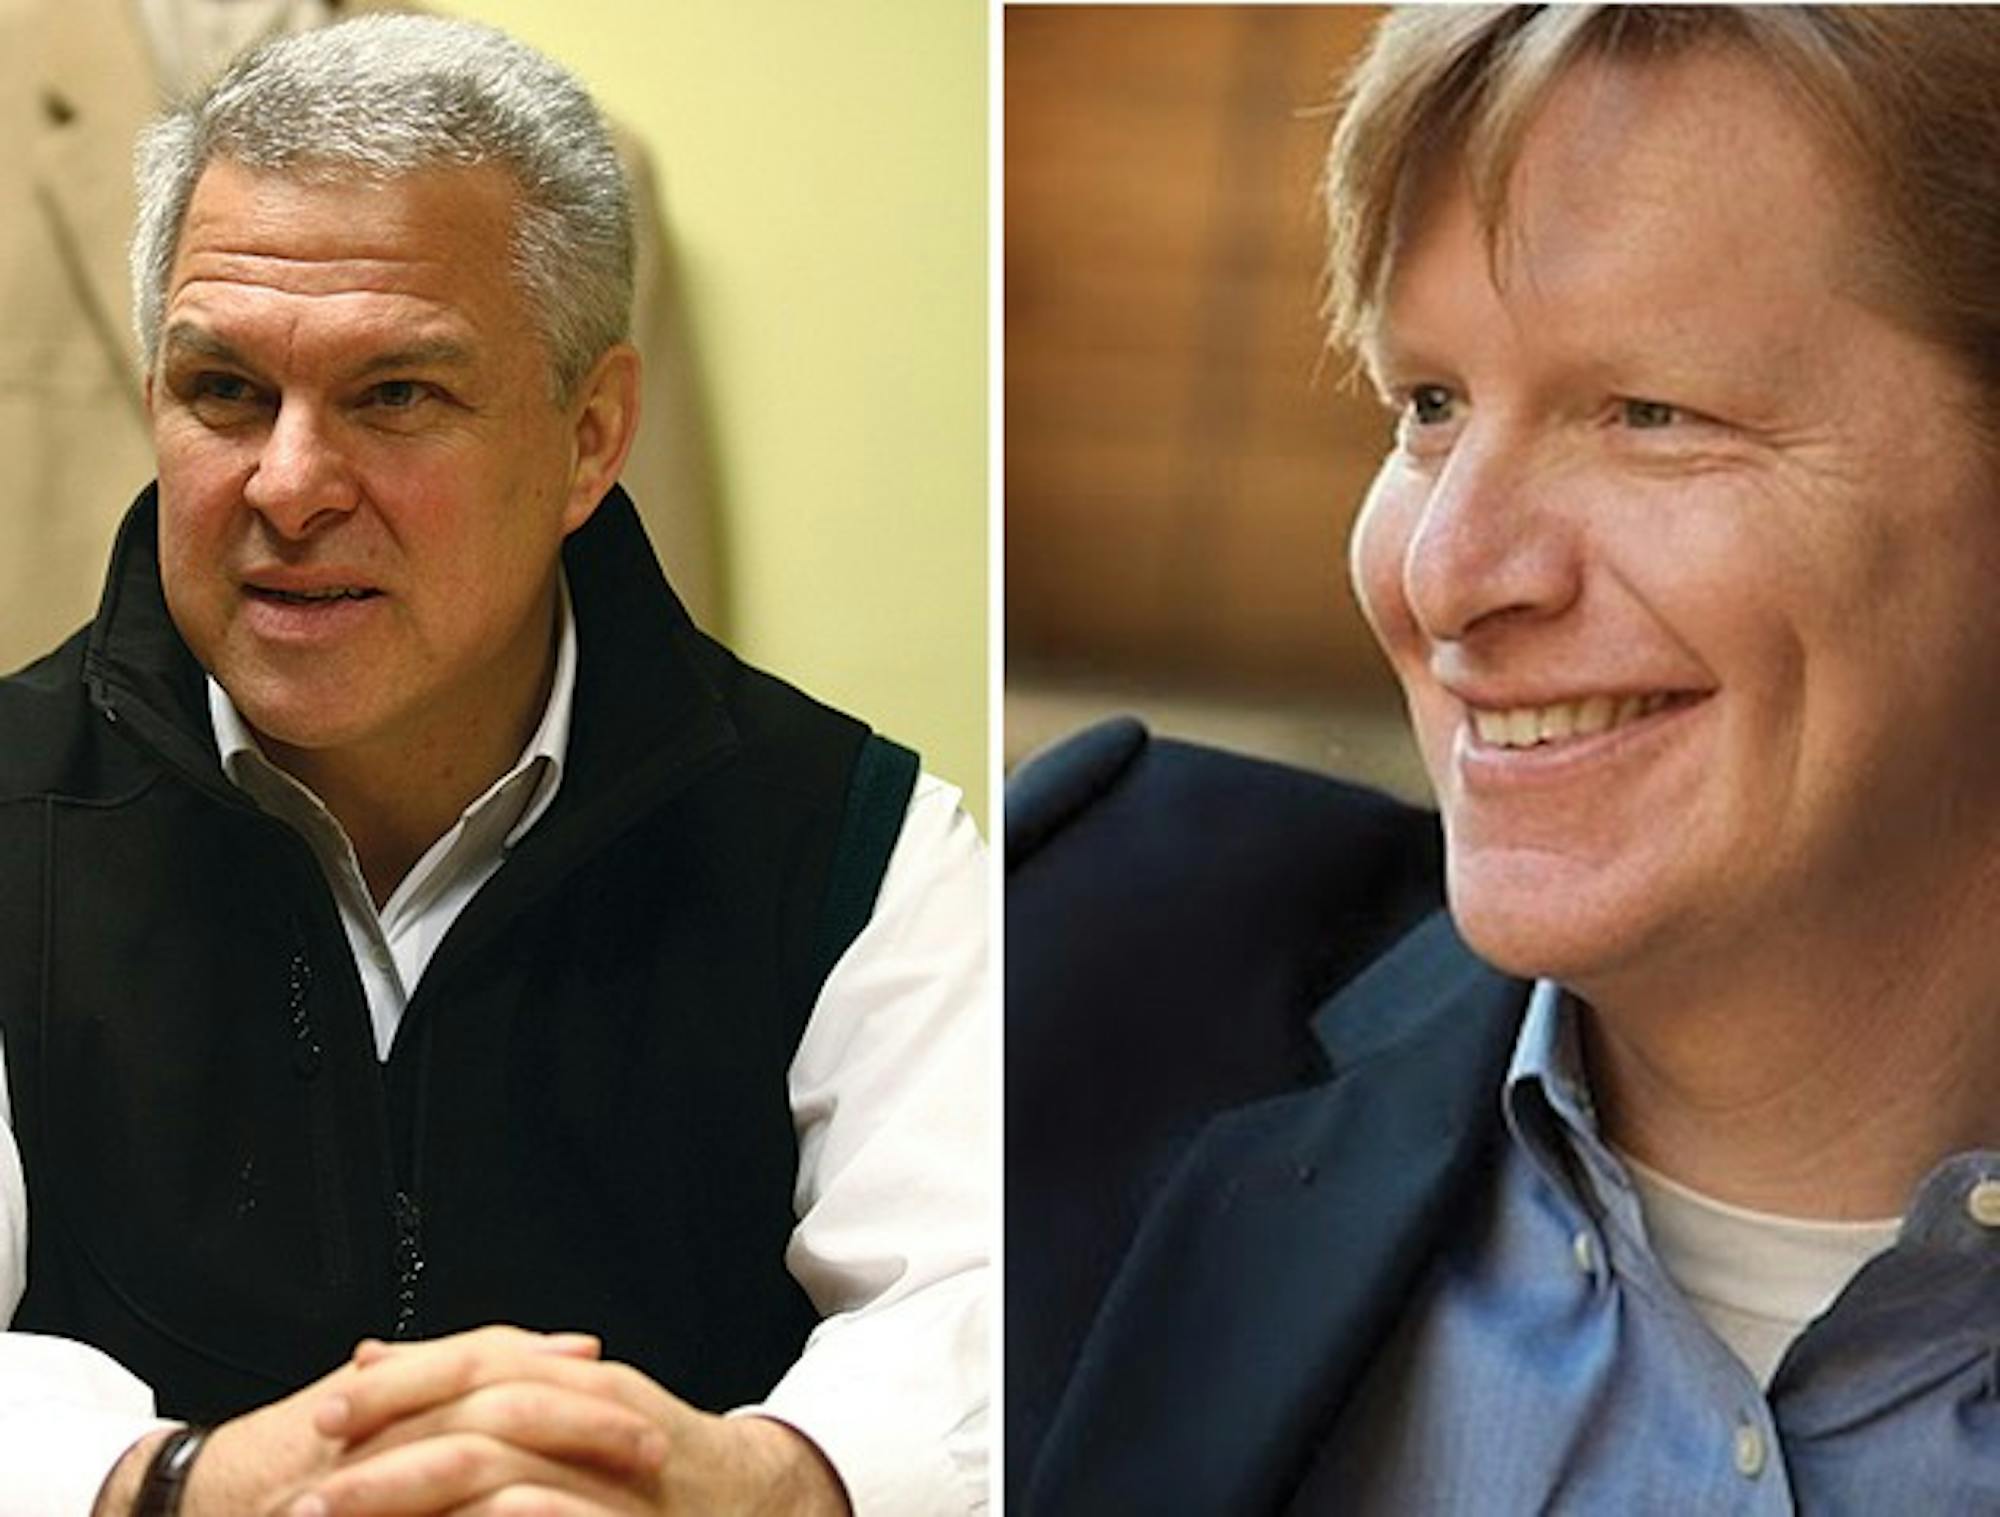 Joe Asch '79 and John Replogle '88 are running for one of two open alumni-elected seats on the Board of Trustees.